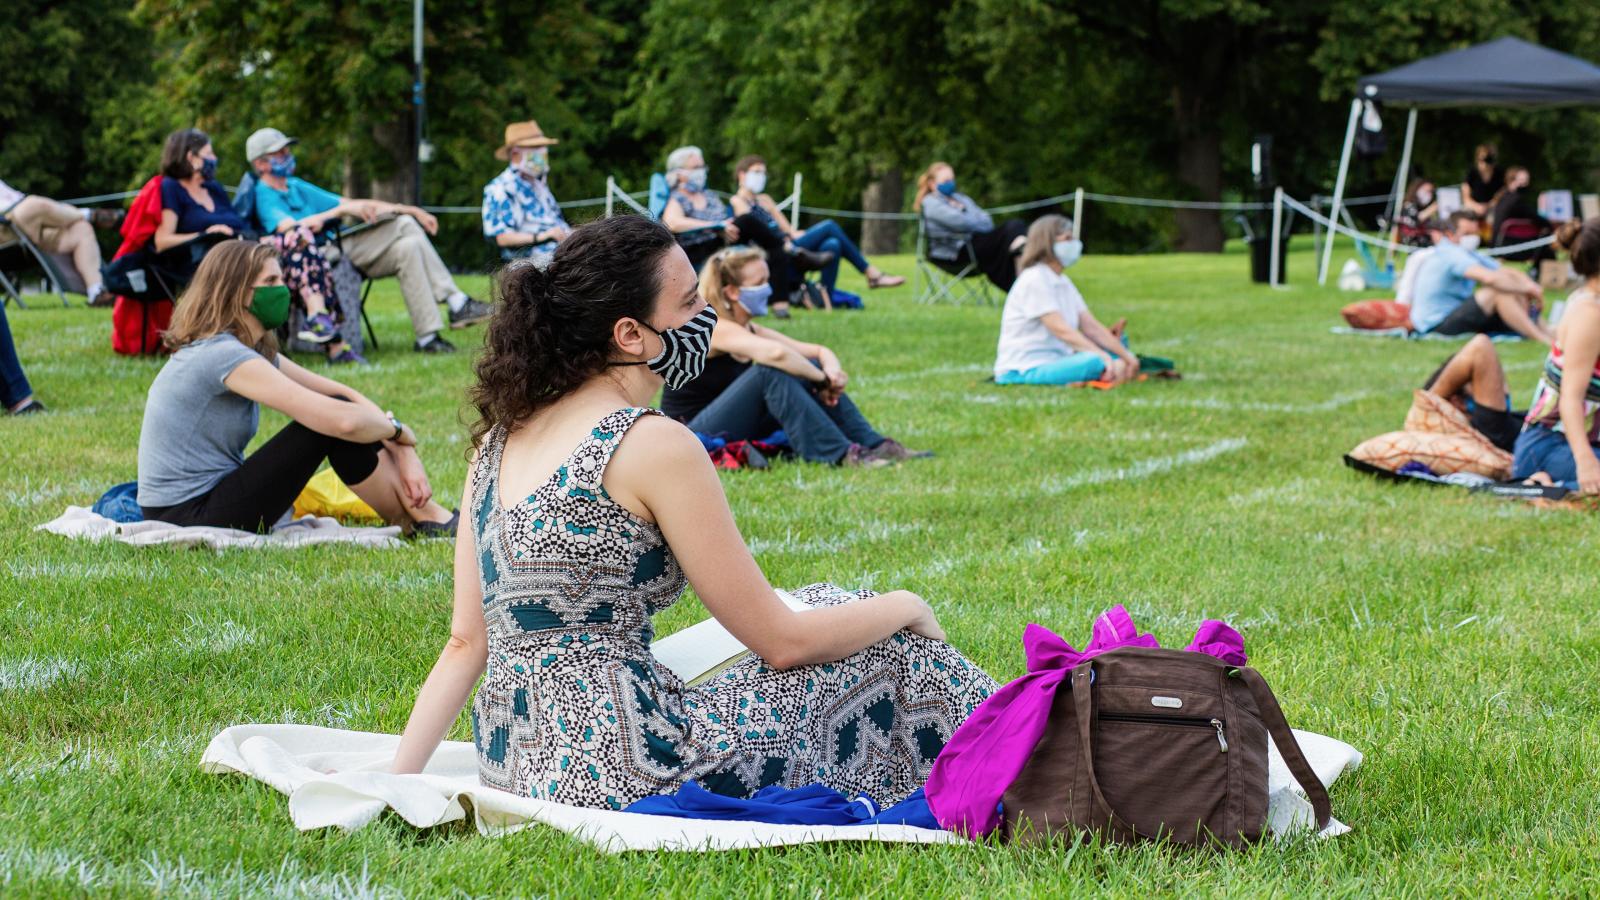 People wearing masks sit on picnic blankets on the grass while spread out from one another